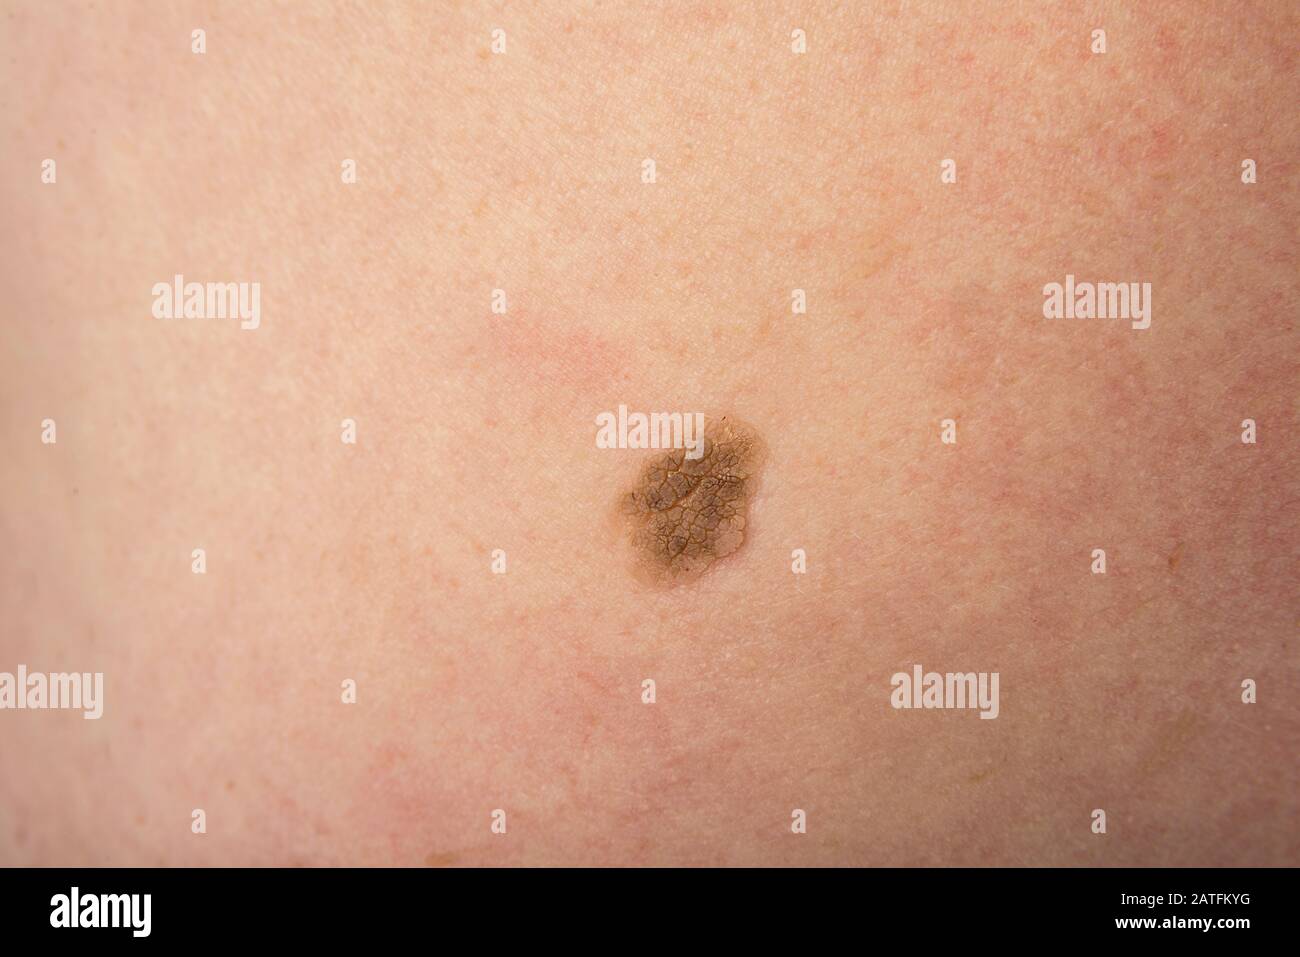 Human Skin wart on a woman belly Stock Photo